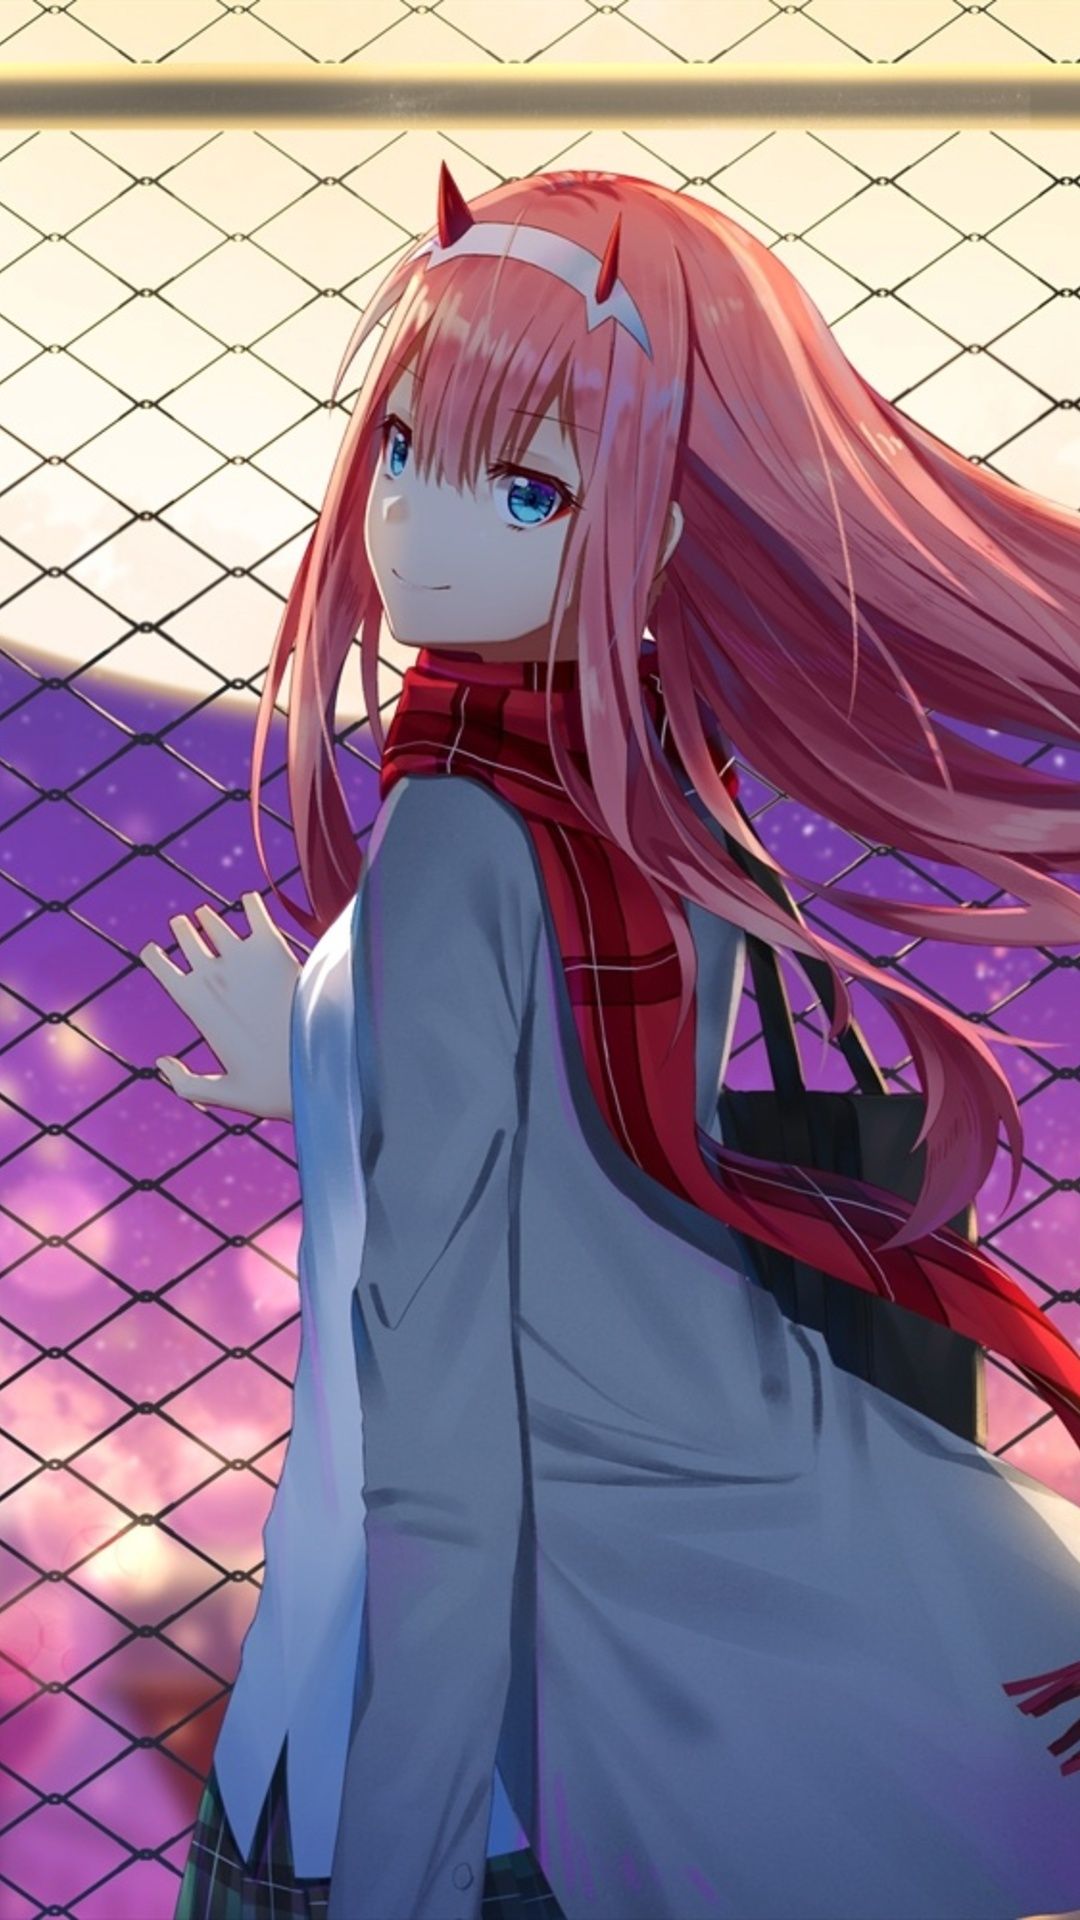 Zero Two Darling In The Franxx iPhone 6s, 6 Plus, Pixel xl , One Plus 3t, 5 HD 4k Wallpaper, Image, Background, Photo and Picture